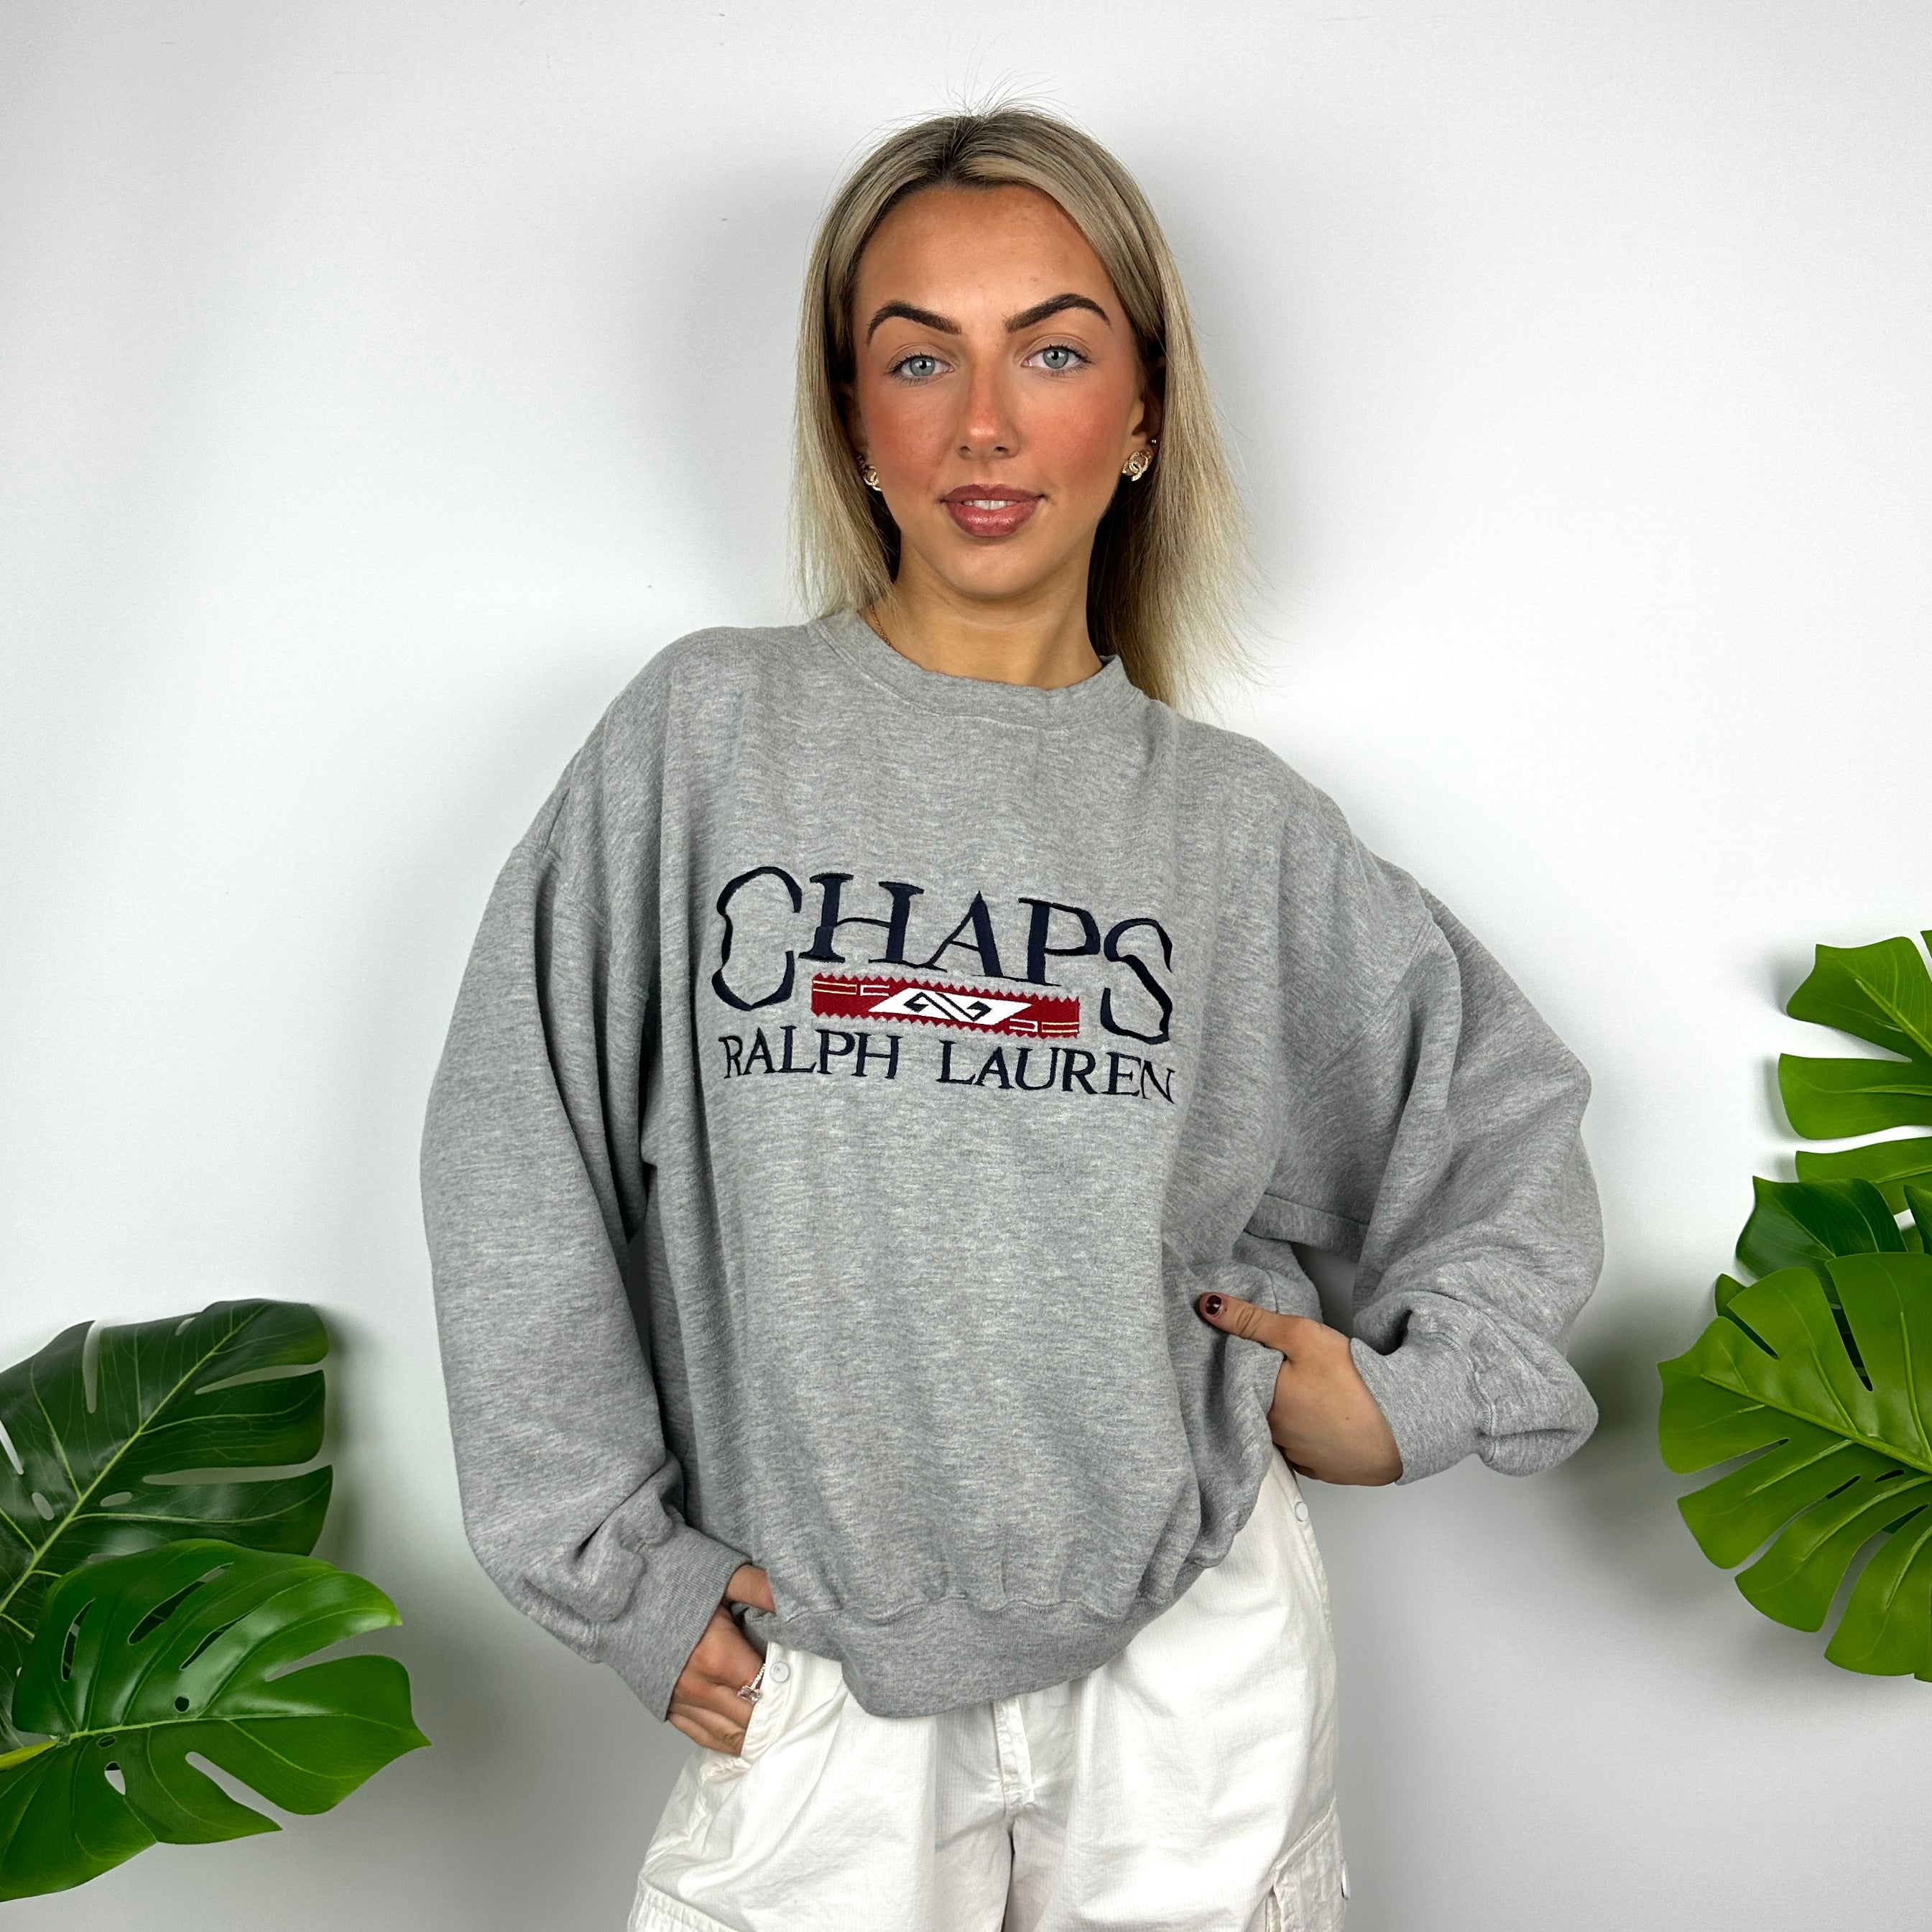 Chaps Ralph Lauren Grey Embroidered Spell Out Sweatshirt (M)